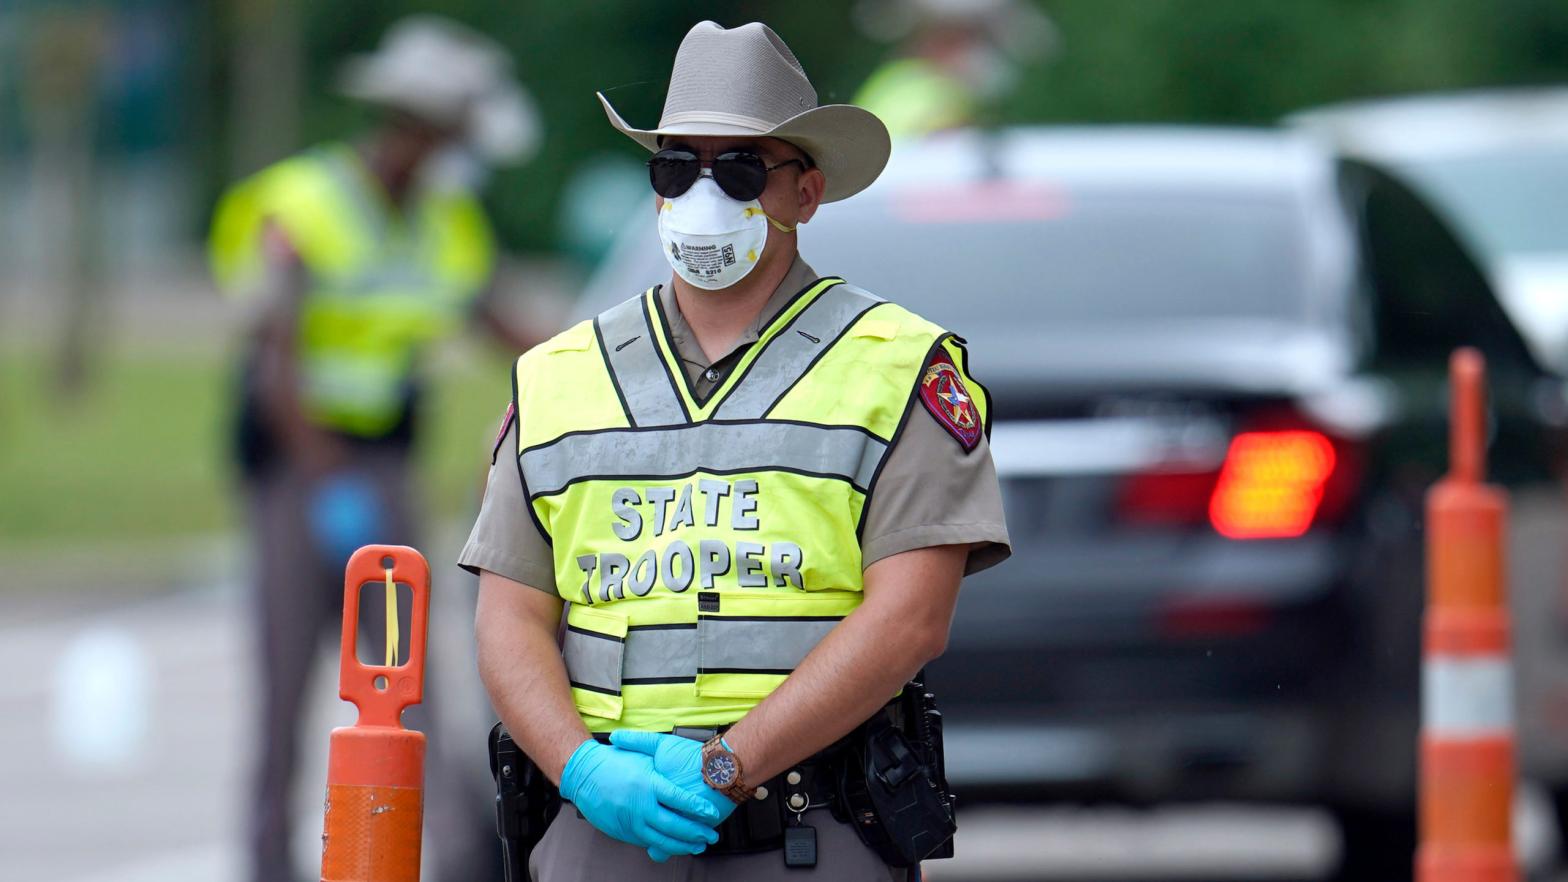 A Texas DPS State Trooper at a coronavirus checkpoint near the border with Louisiana in Orange, Texas, in April 2020. (Photo: David J. Philip, AP)